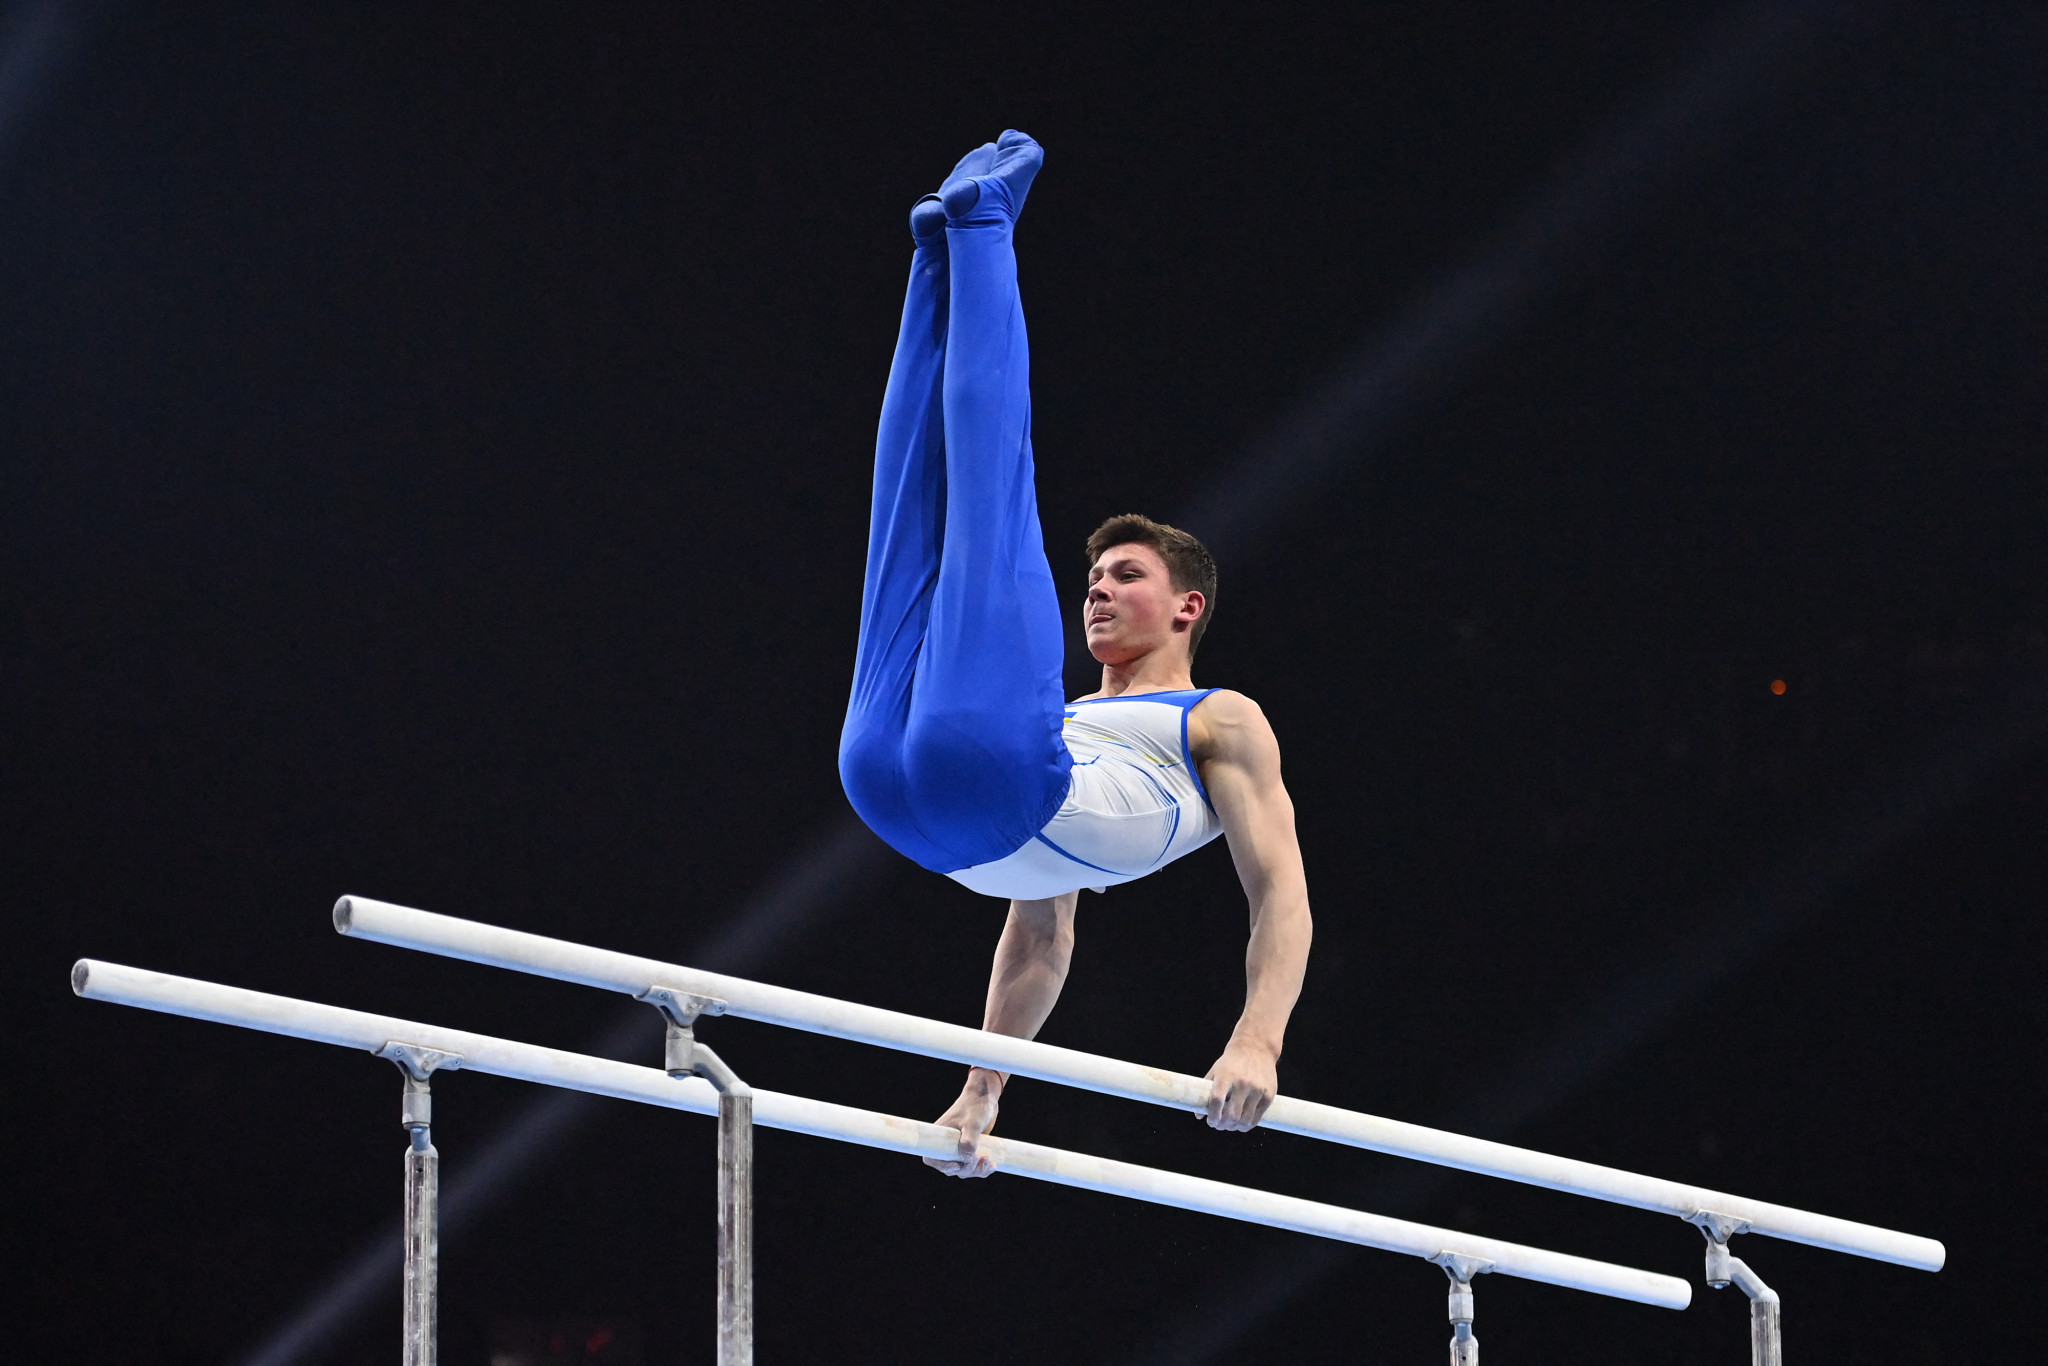 Illia Kovtun has now won the parallel bars event at consecutive World Cups ©Getty Images